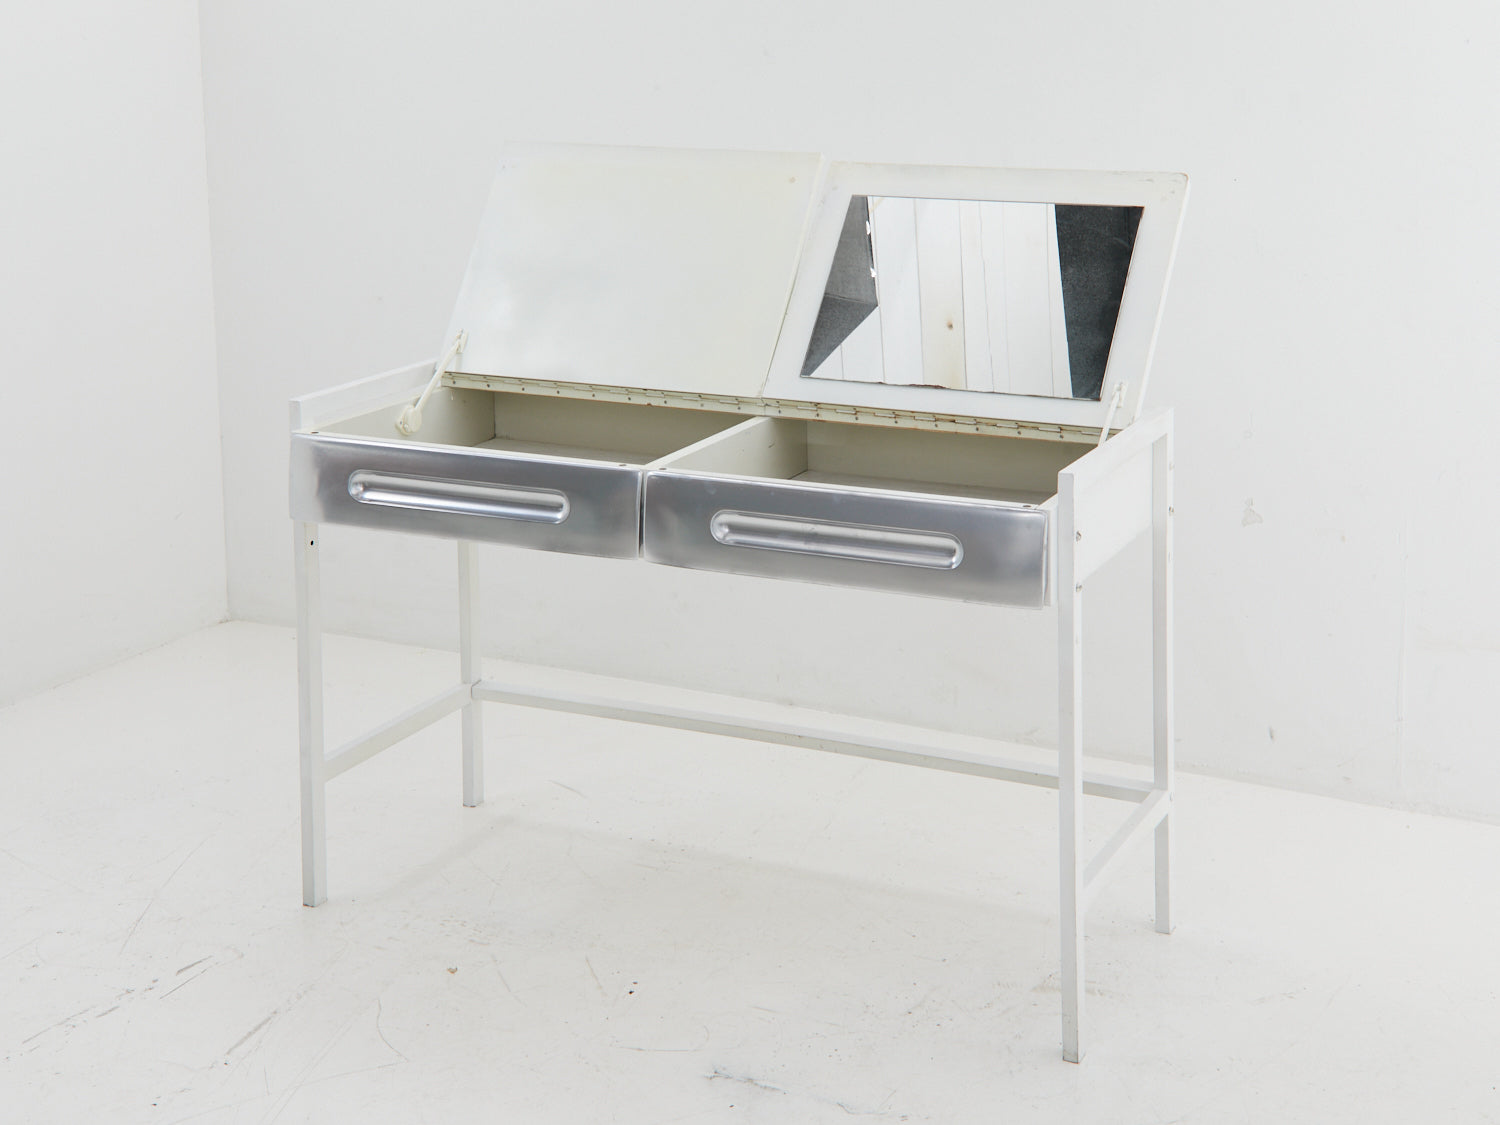 View of both flip-tops extended on a white and silver desk in the style of Raymond Loewy